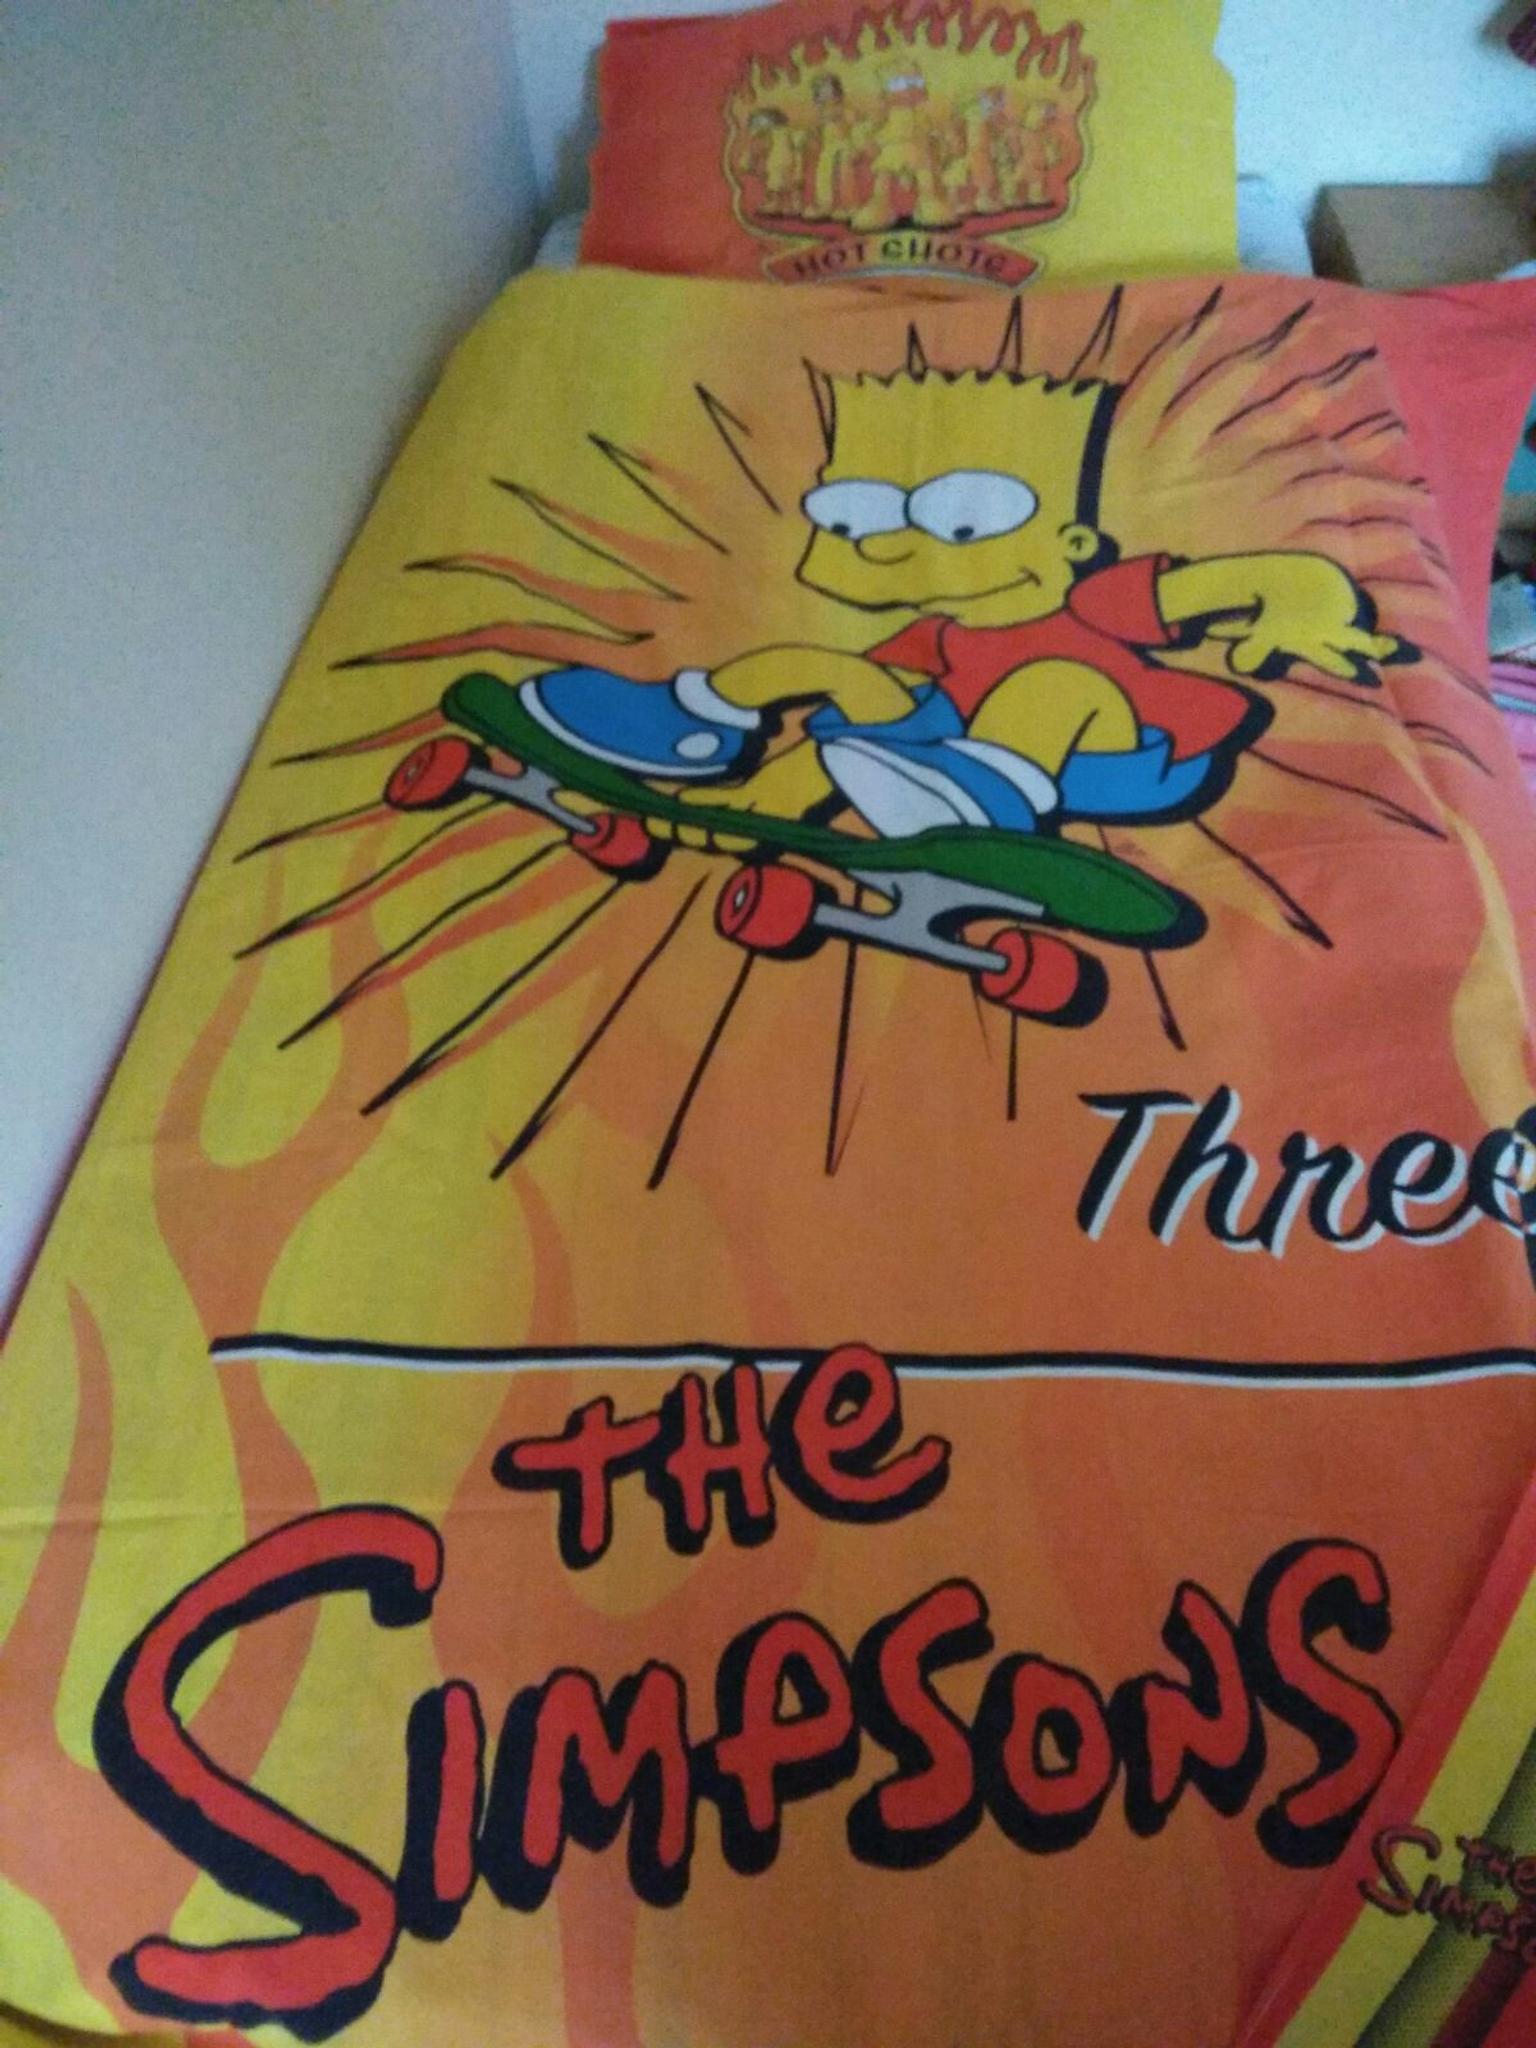 The Simpsons Duvet Cover Set In Tn9 Malling For 10 00 For Sale